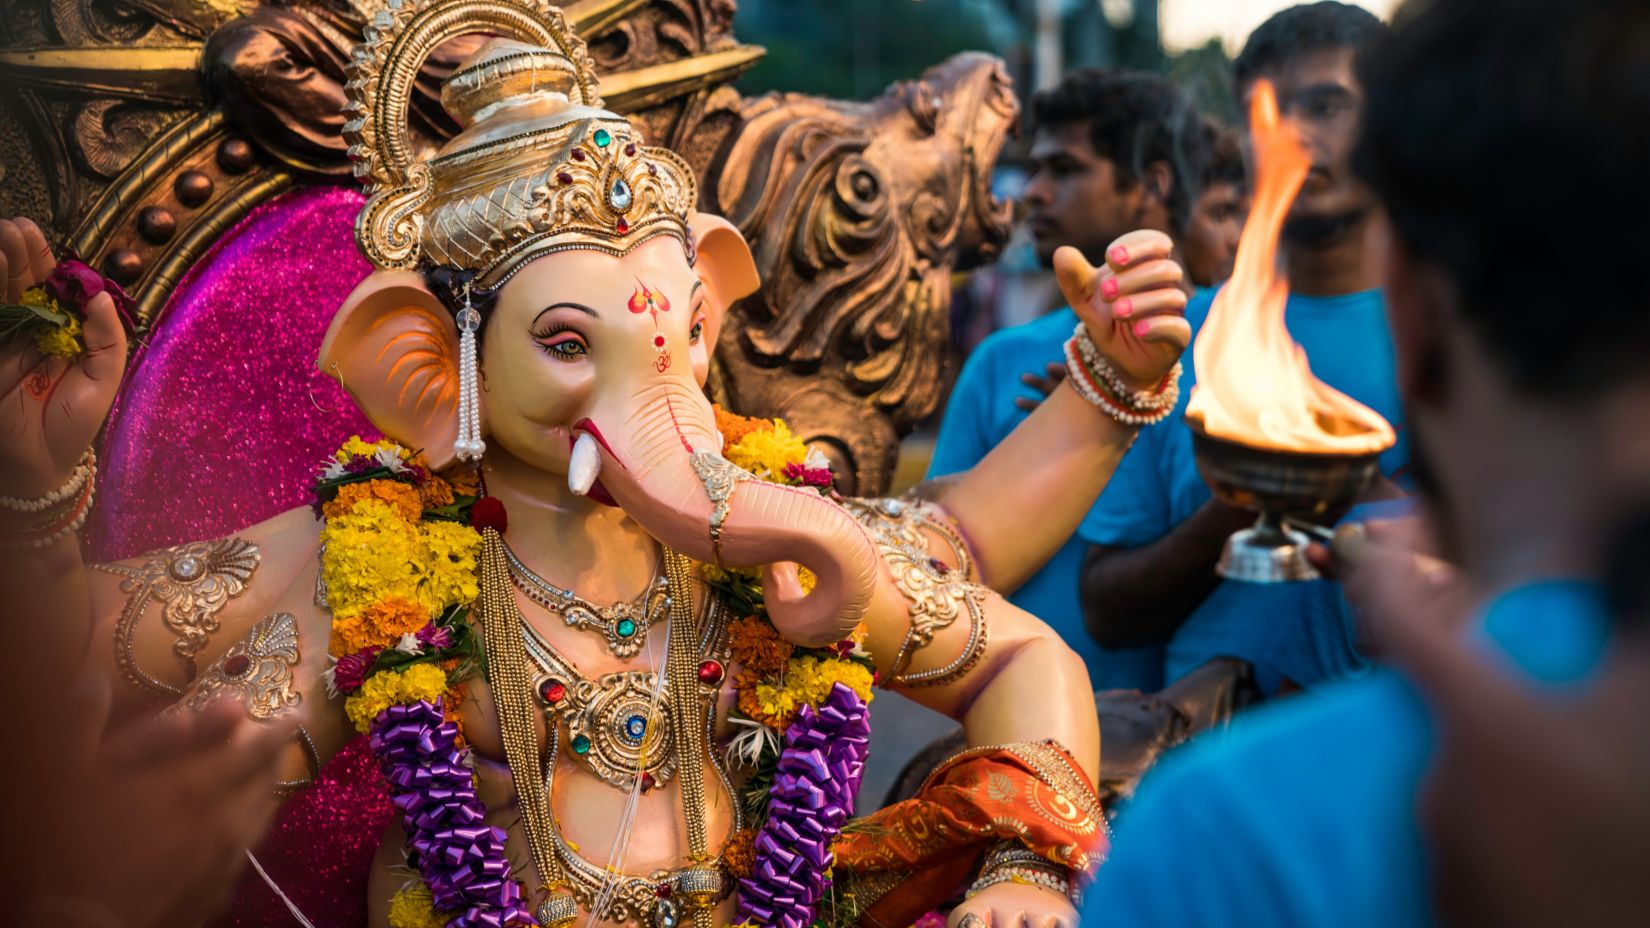 a person dressed as Ganesha dancing on the street with an arthi being performed on that person